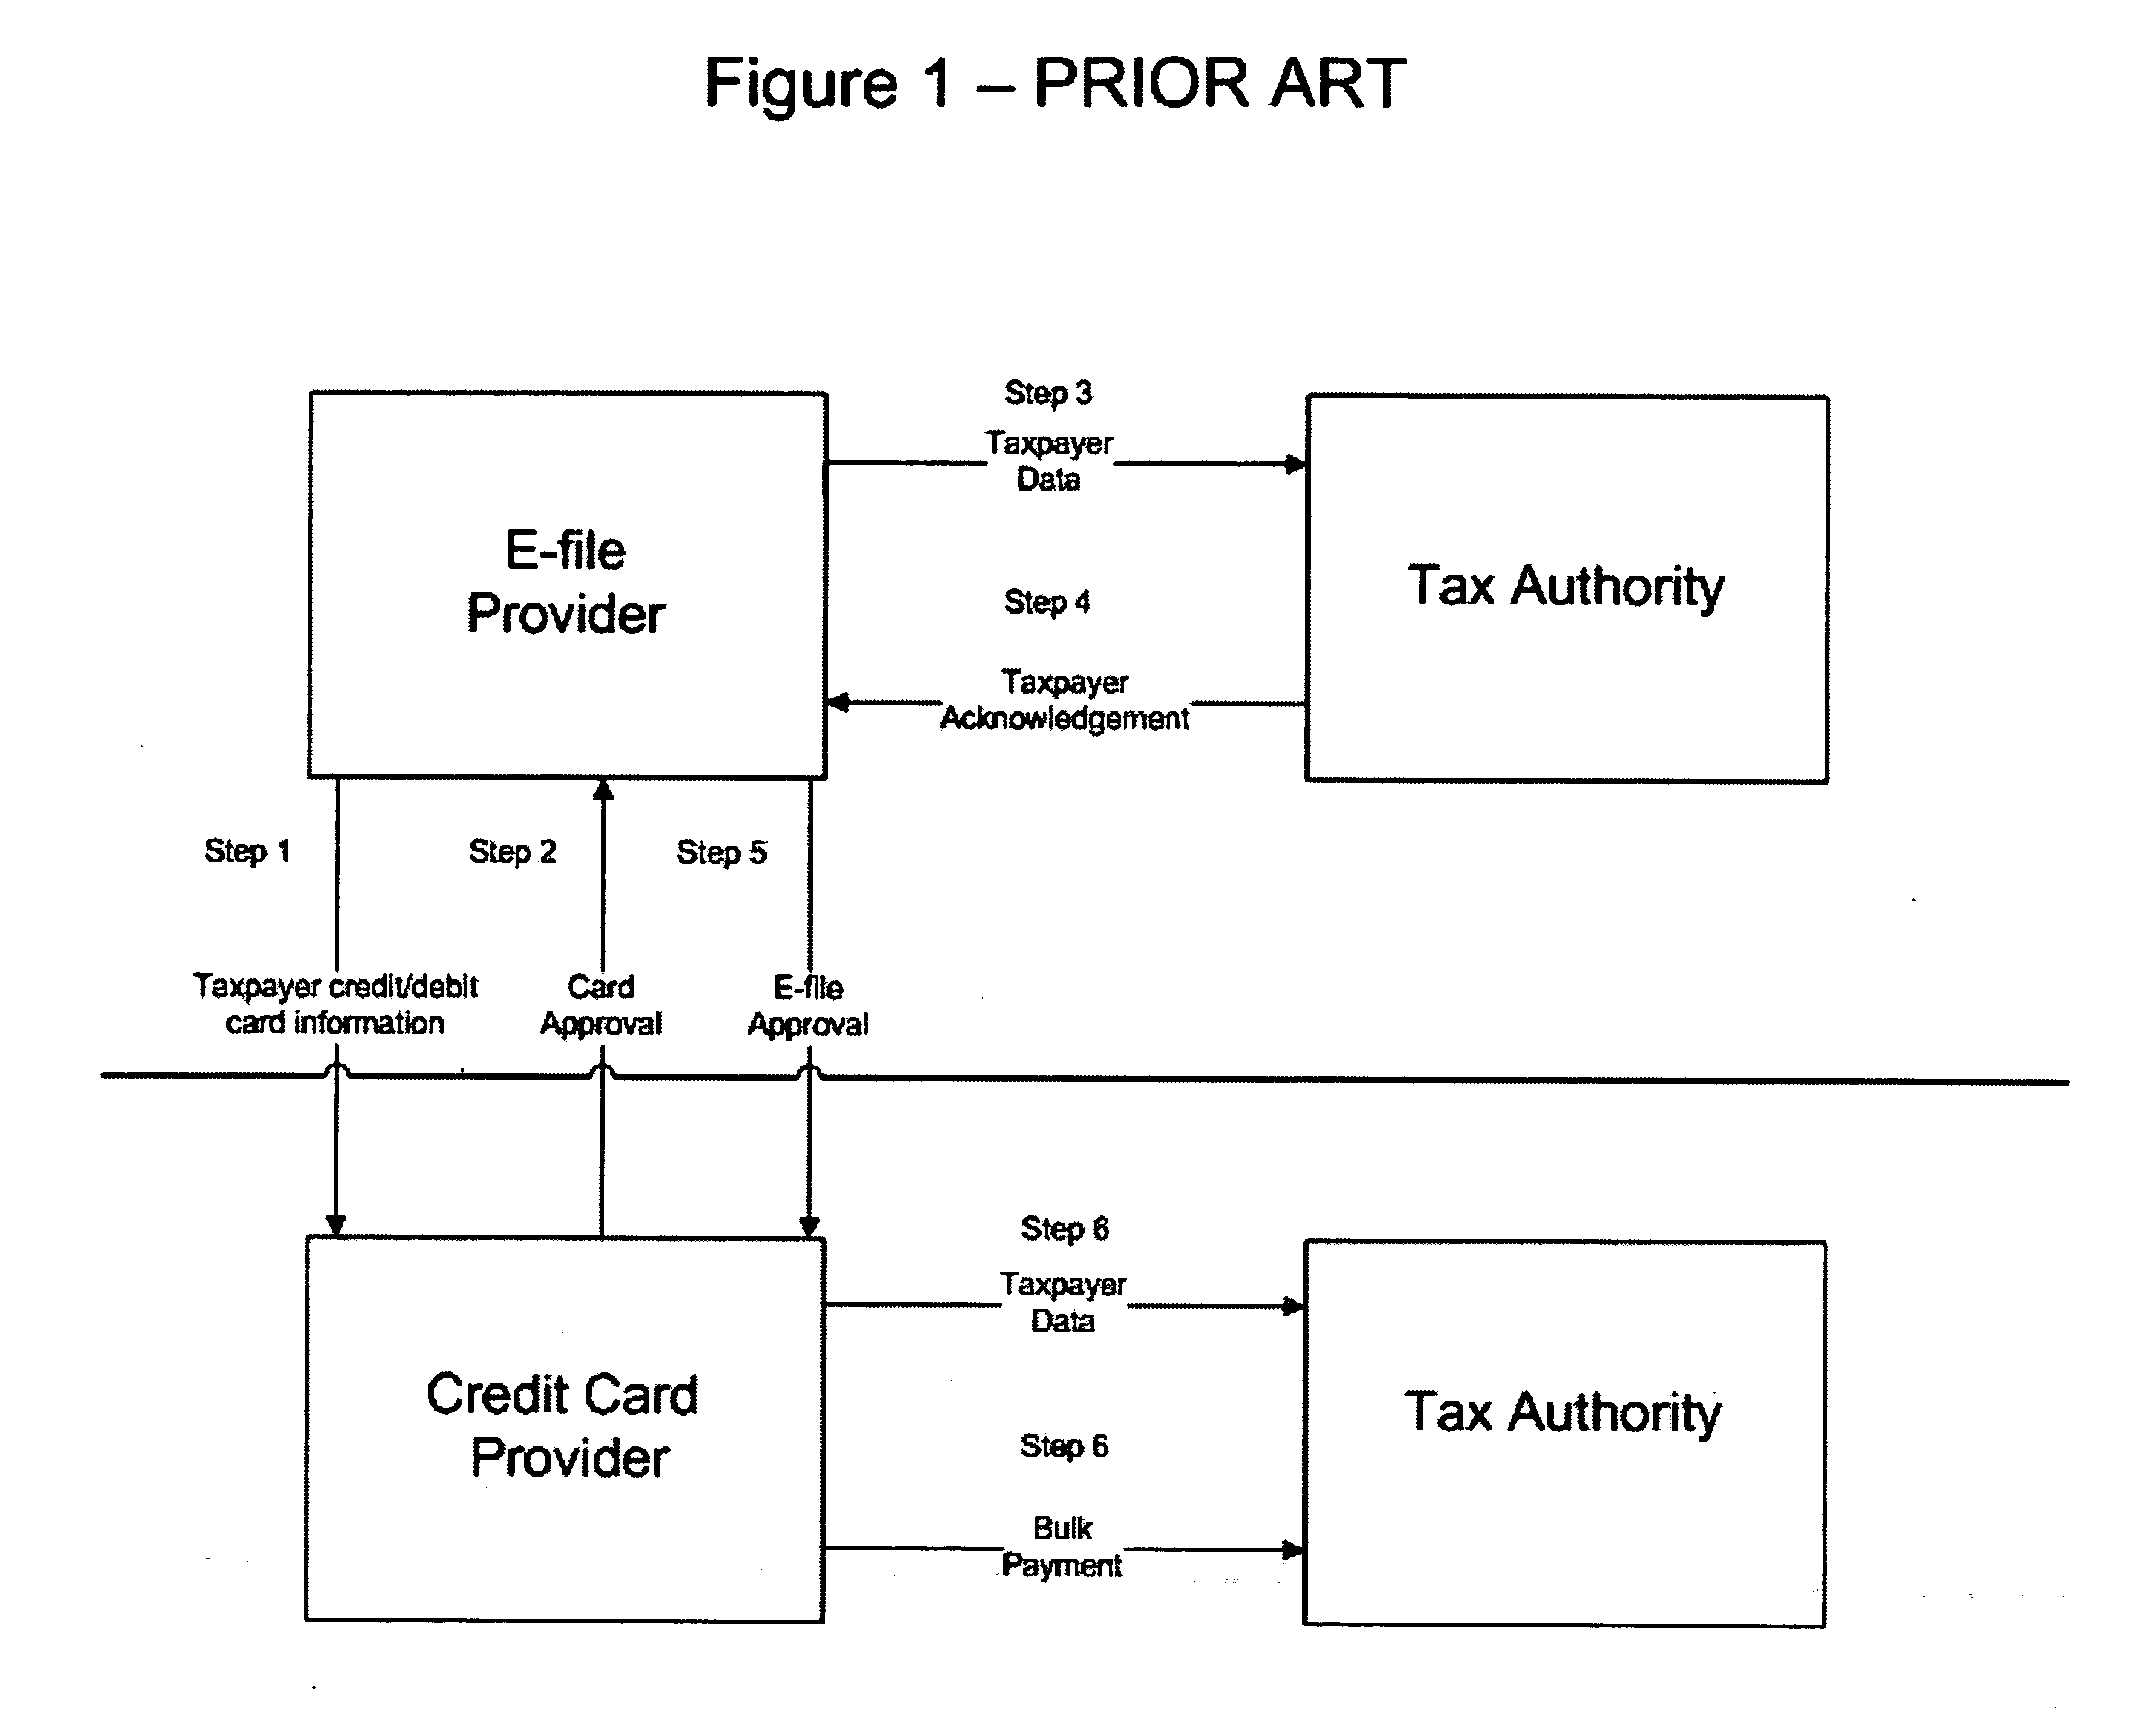 Methods for electronic payments using a third party facilitator